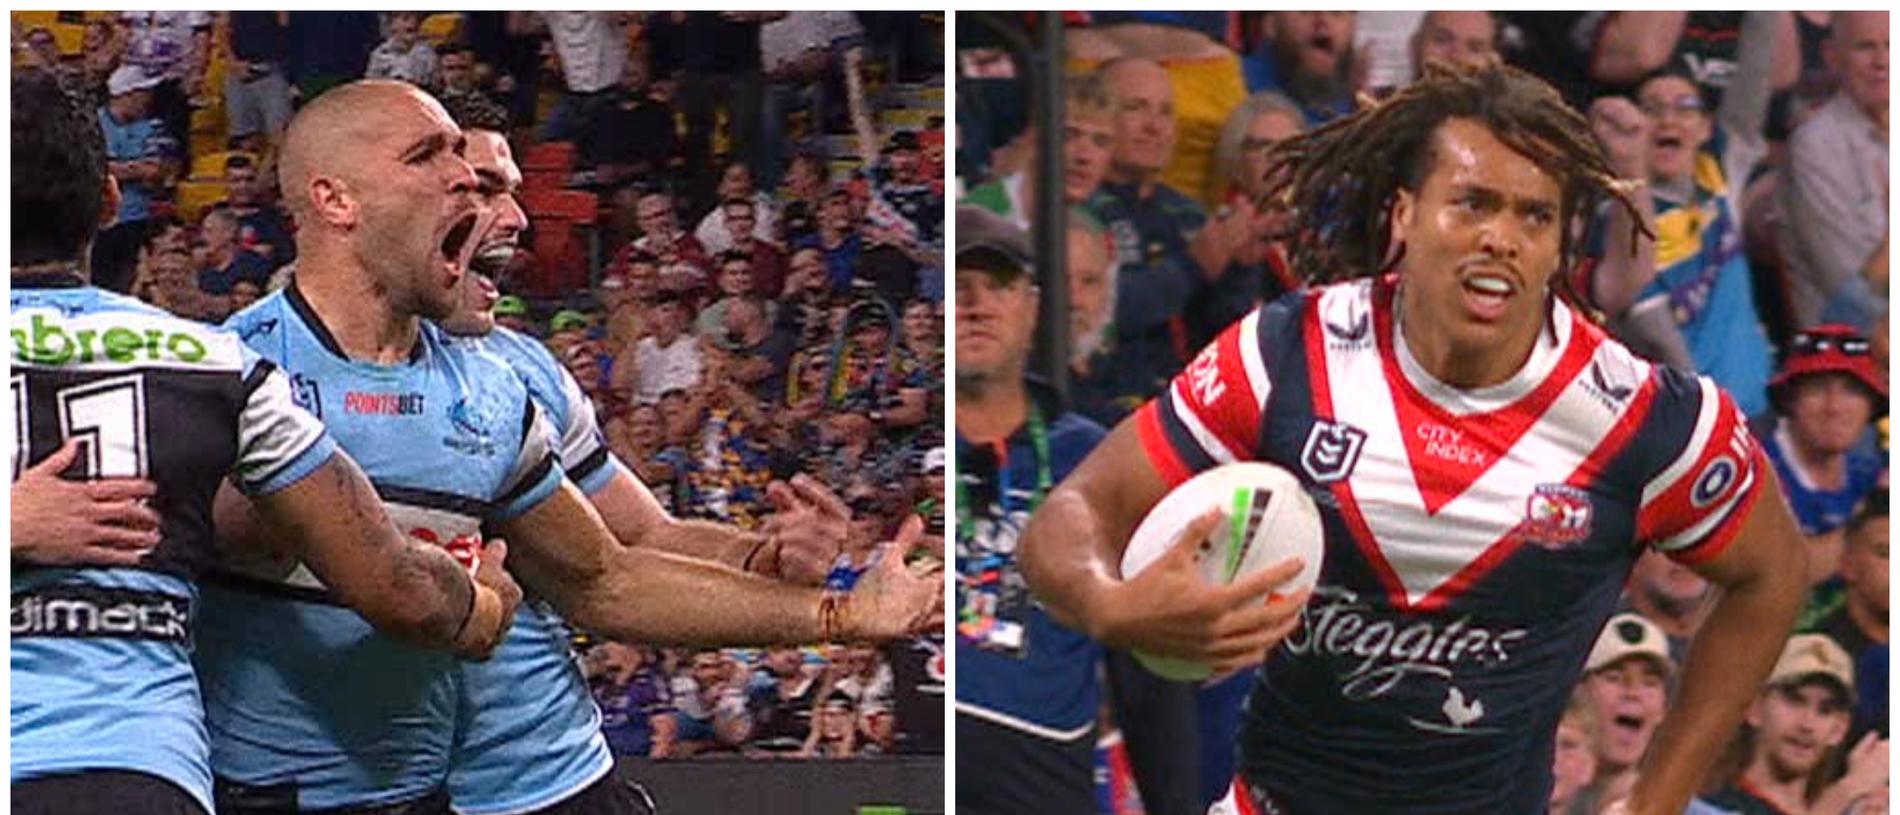 The Sharks and Roosters' brilliant attacks immediately put on a show.